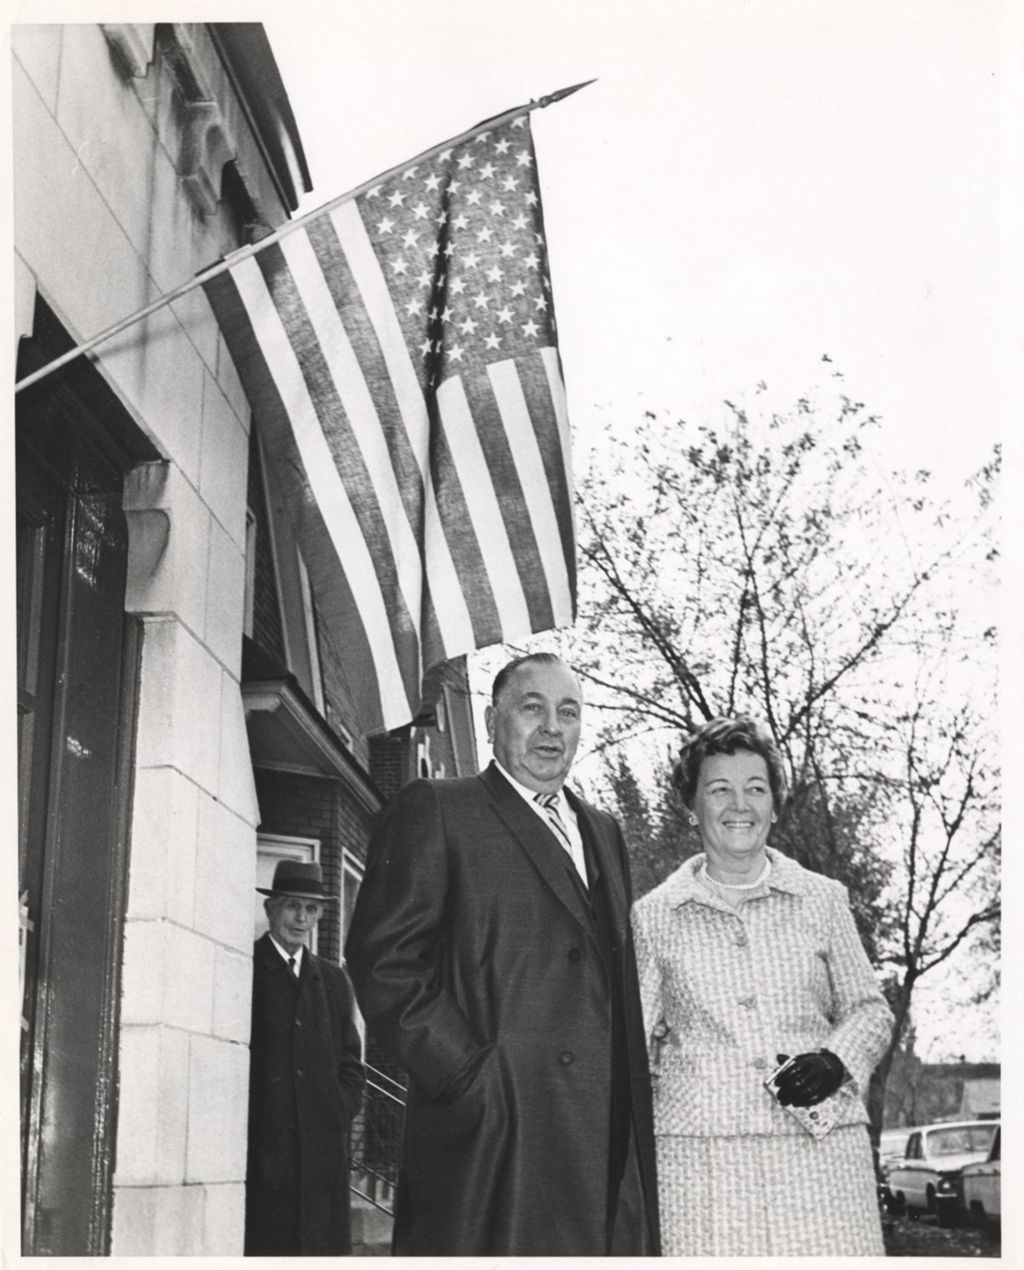 Miniature of Richard J. Daley and Eleanor Daley outside the 11th Ward polling place